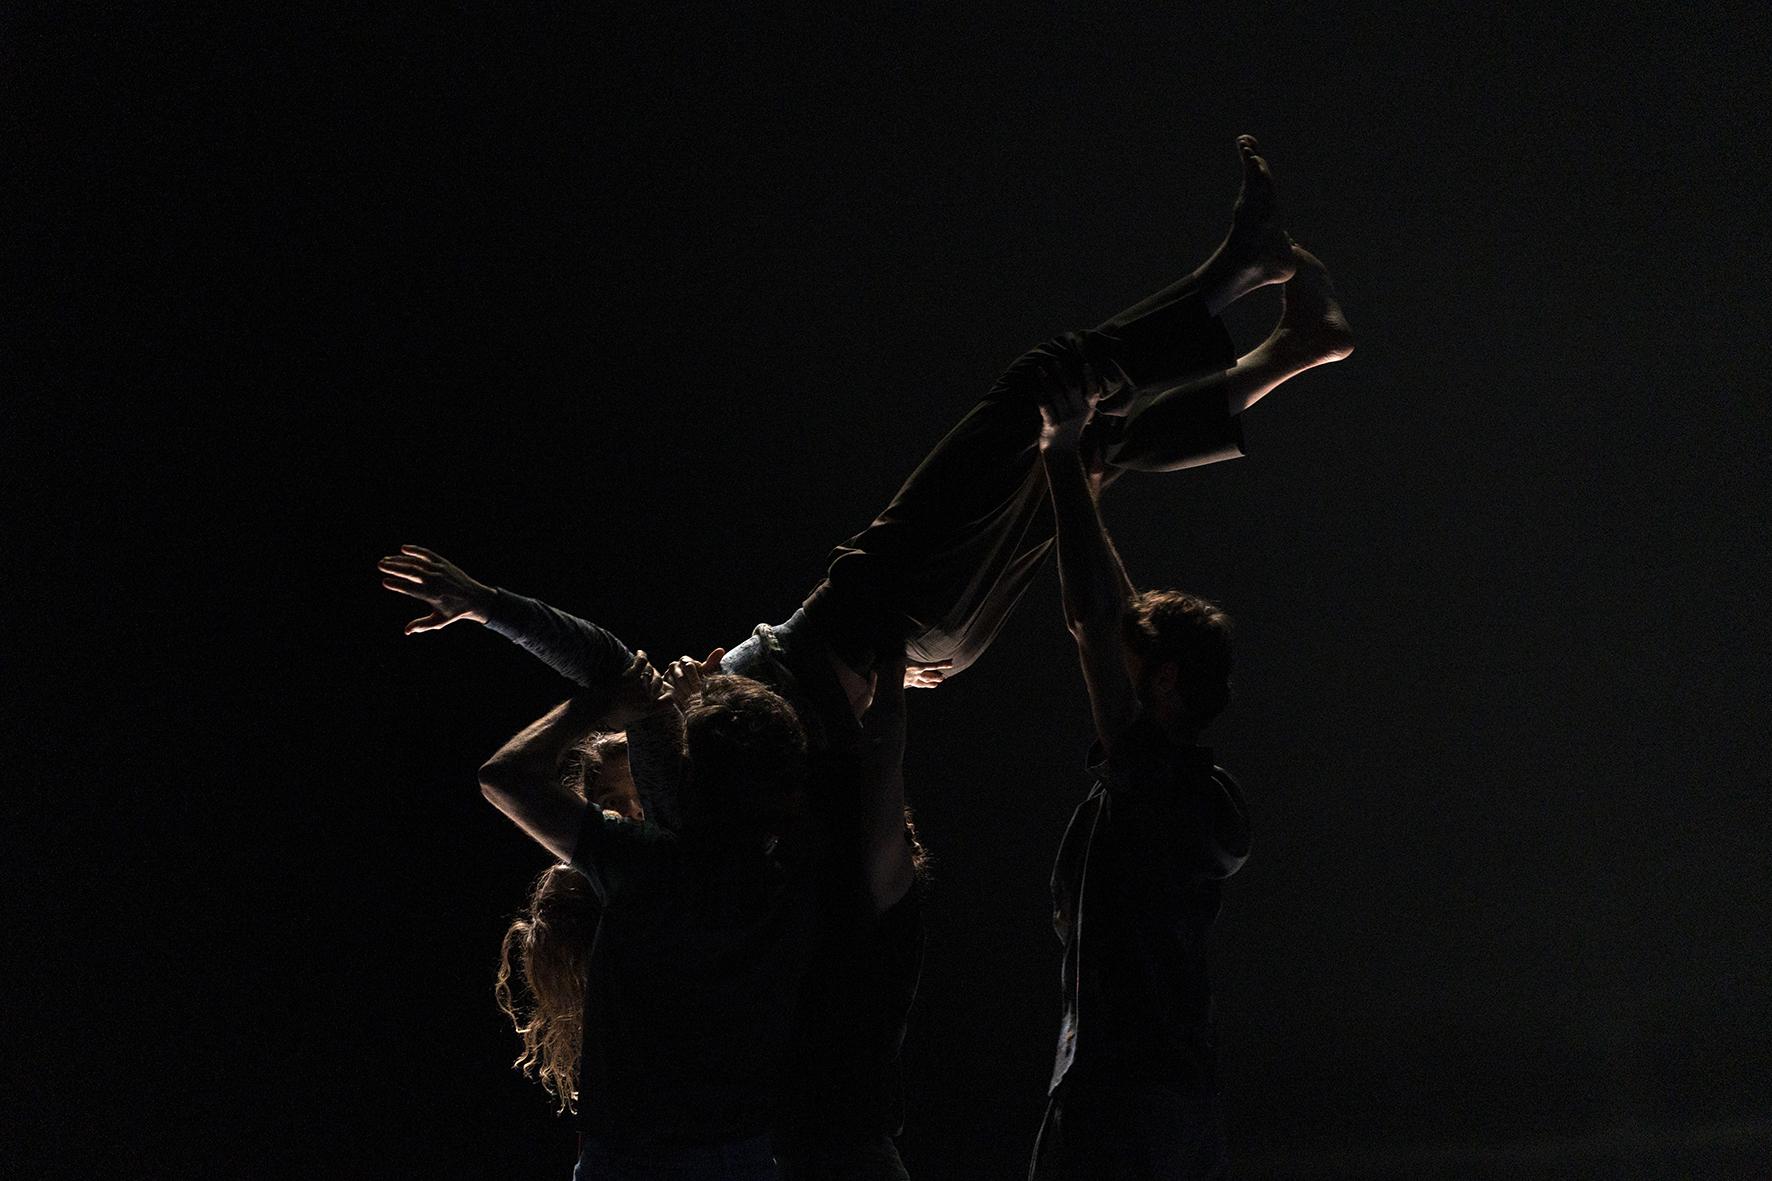 Dancers carrying a person up in the air on a dark stage